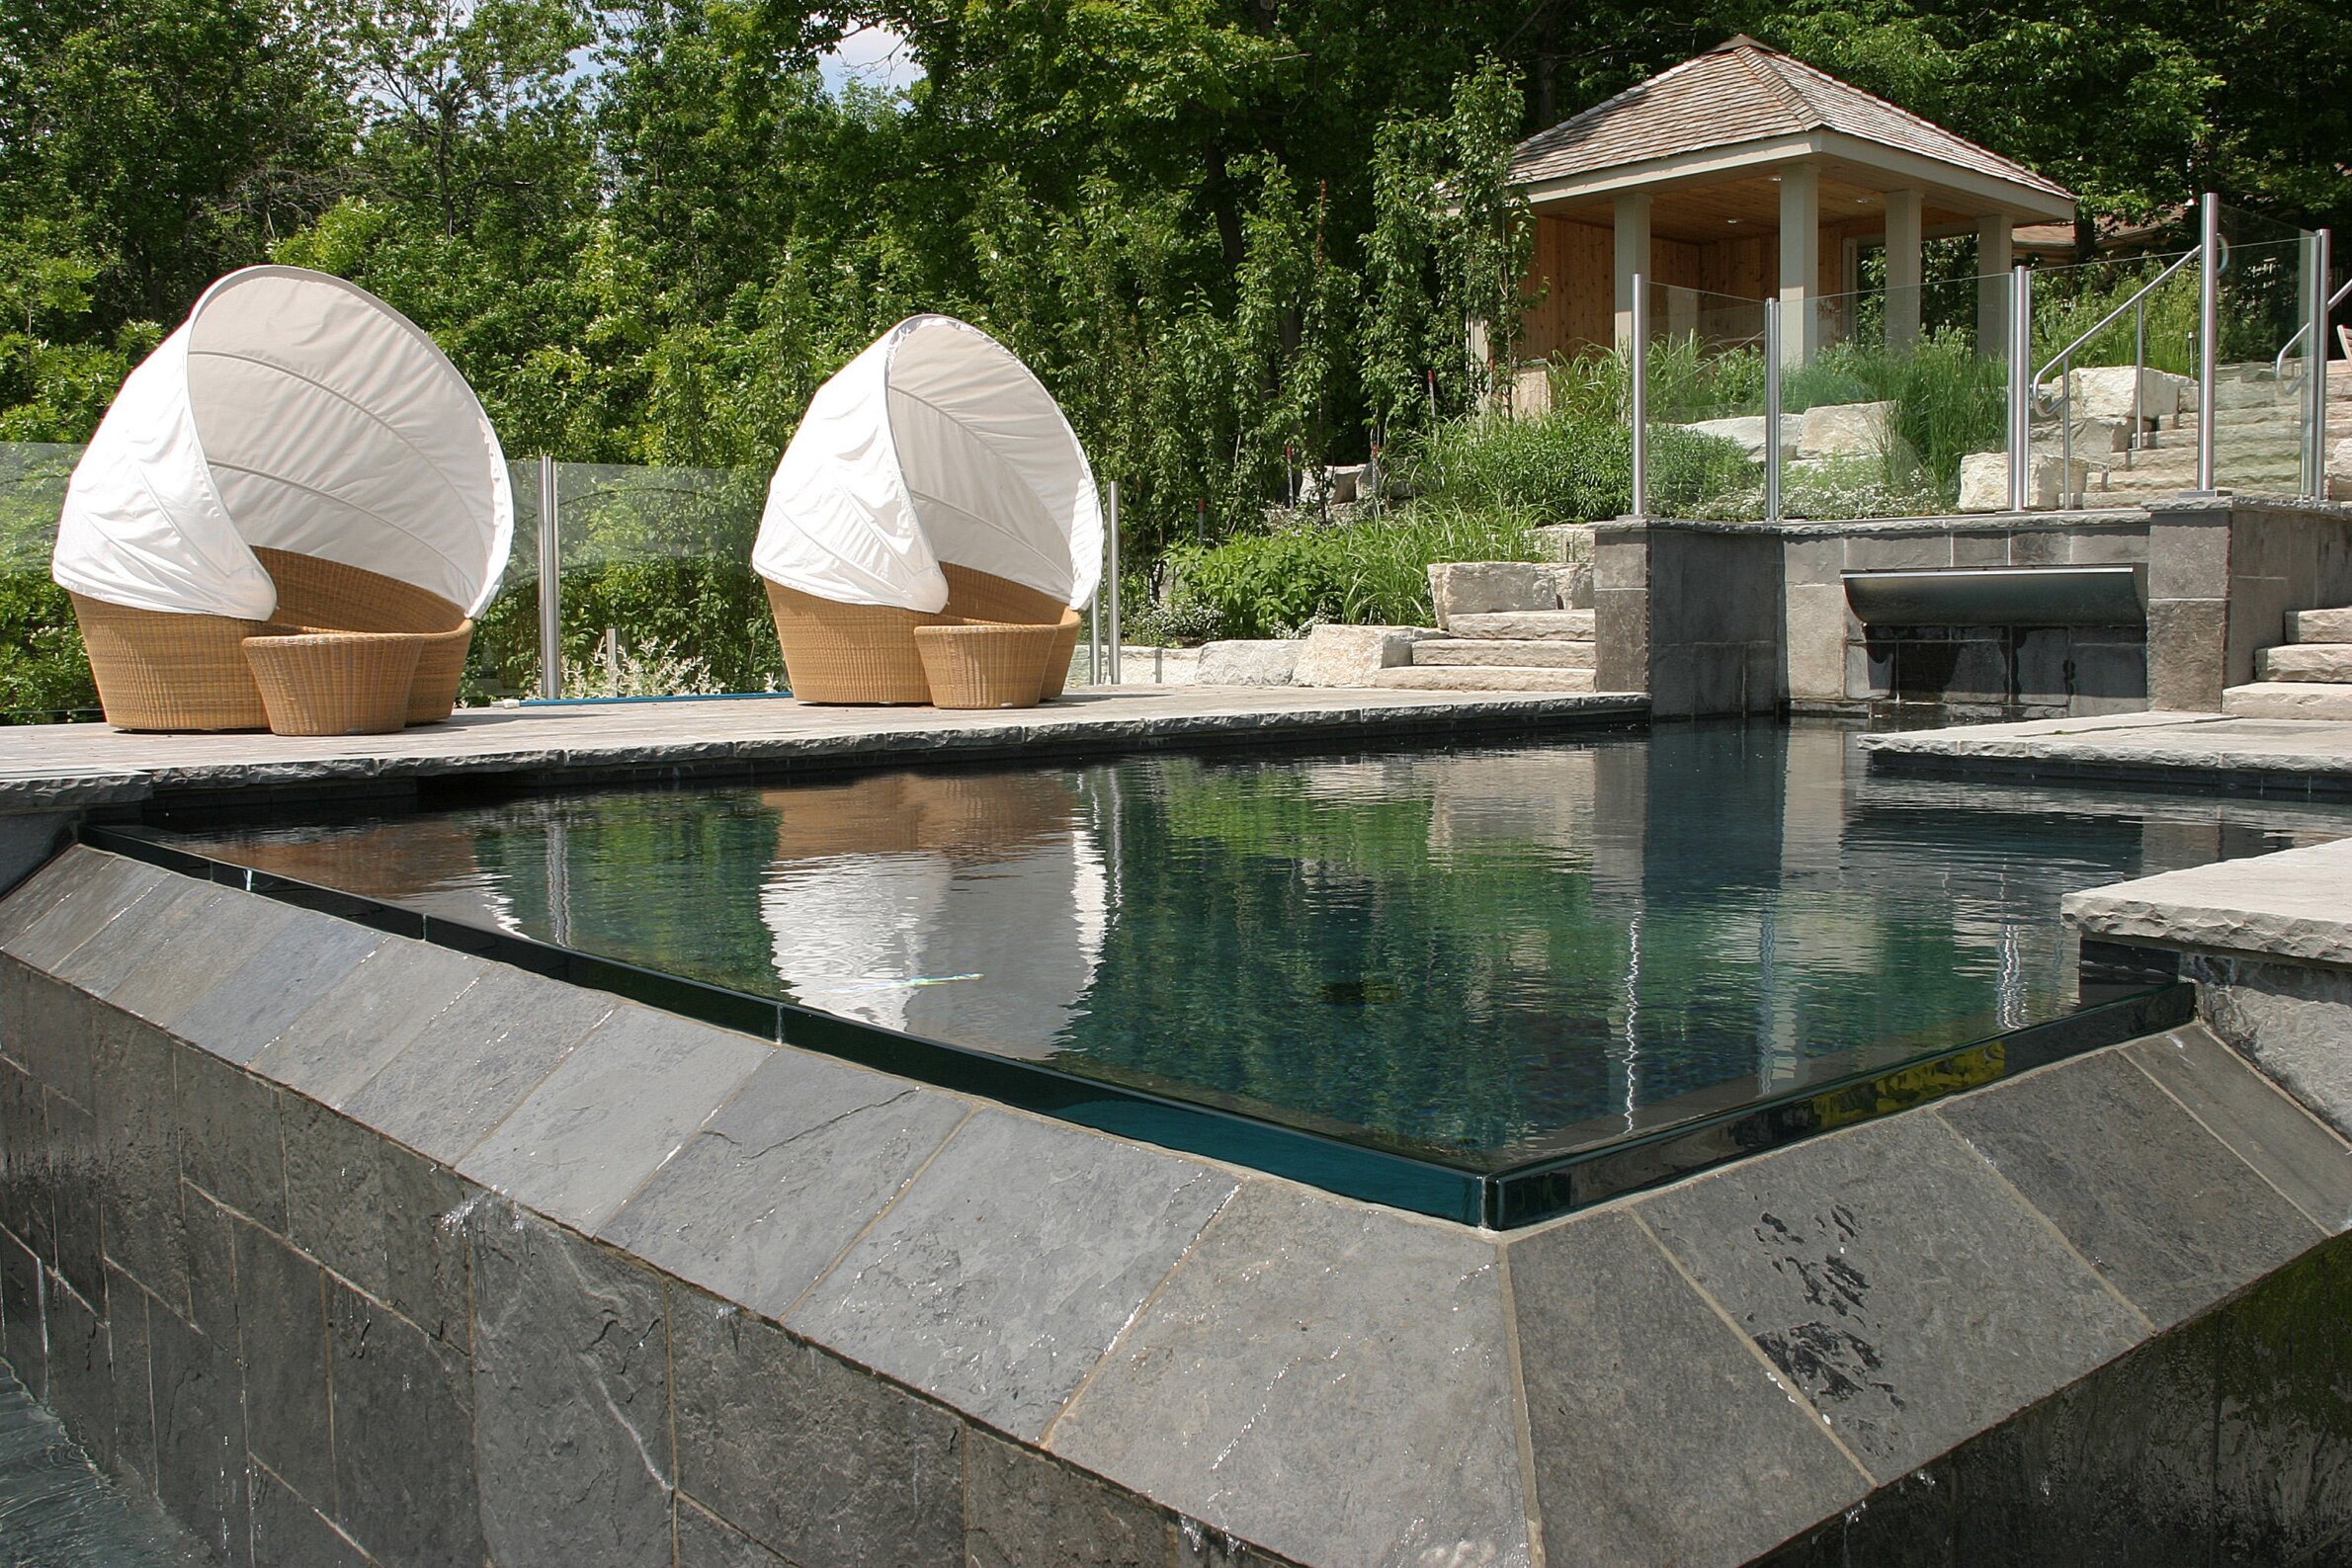 An outdoor pool with stone edges features two unique clamshell chairs and a gazebo in a lush, green landscaped backyard.